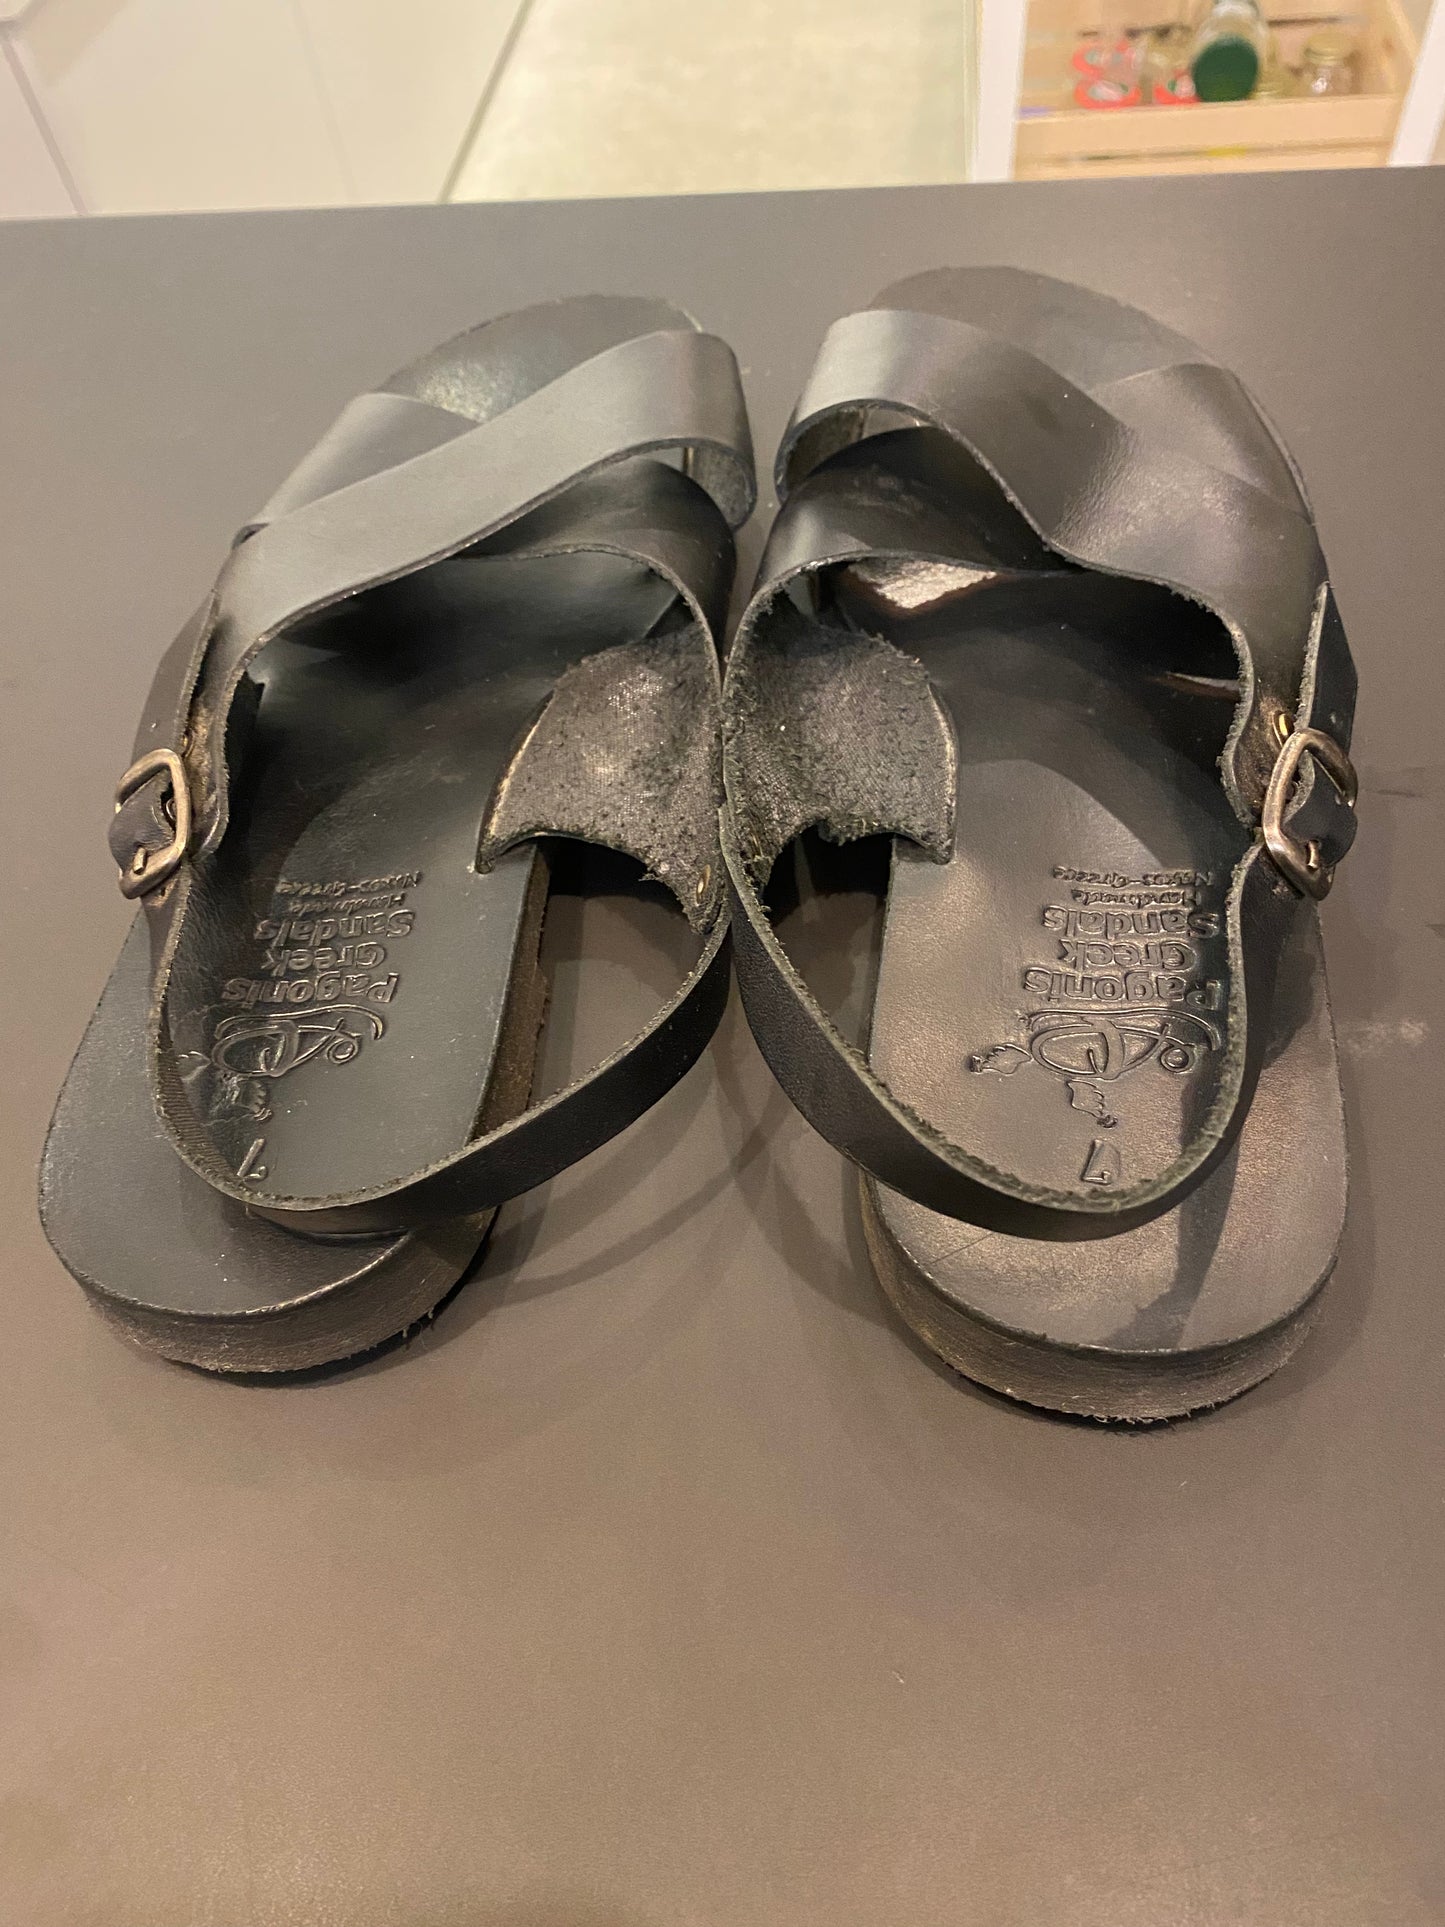 Consignment 3441-05 Pagonis Greek sandals sz 7